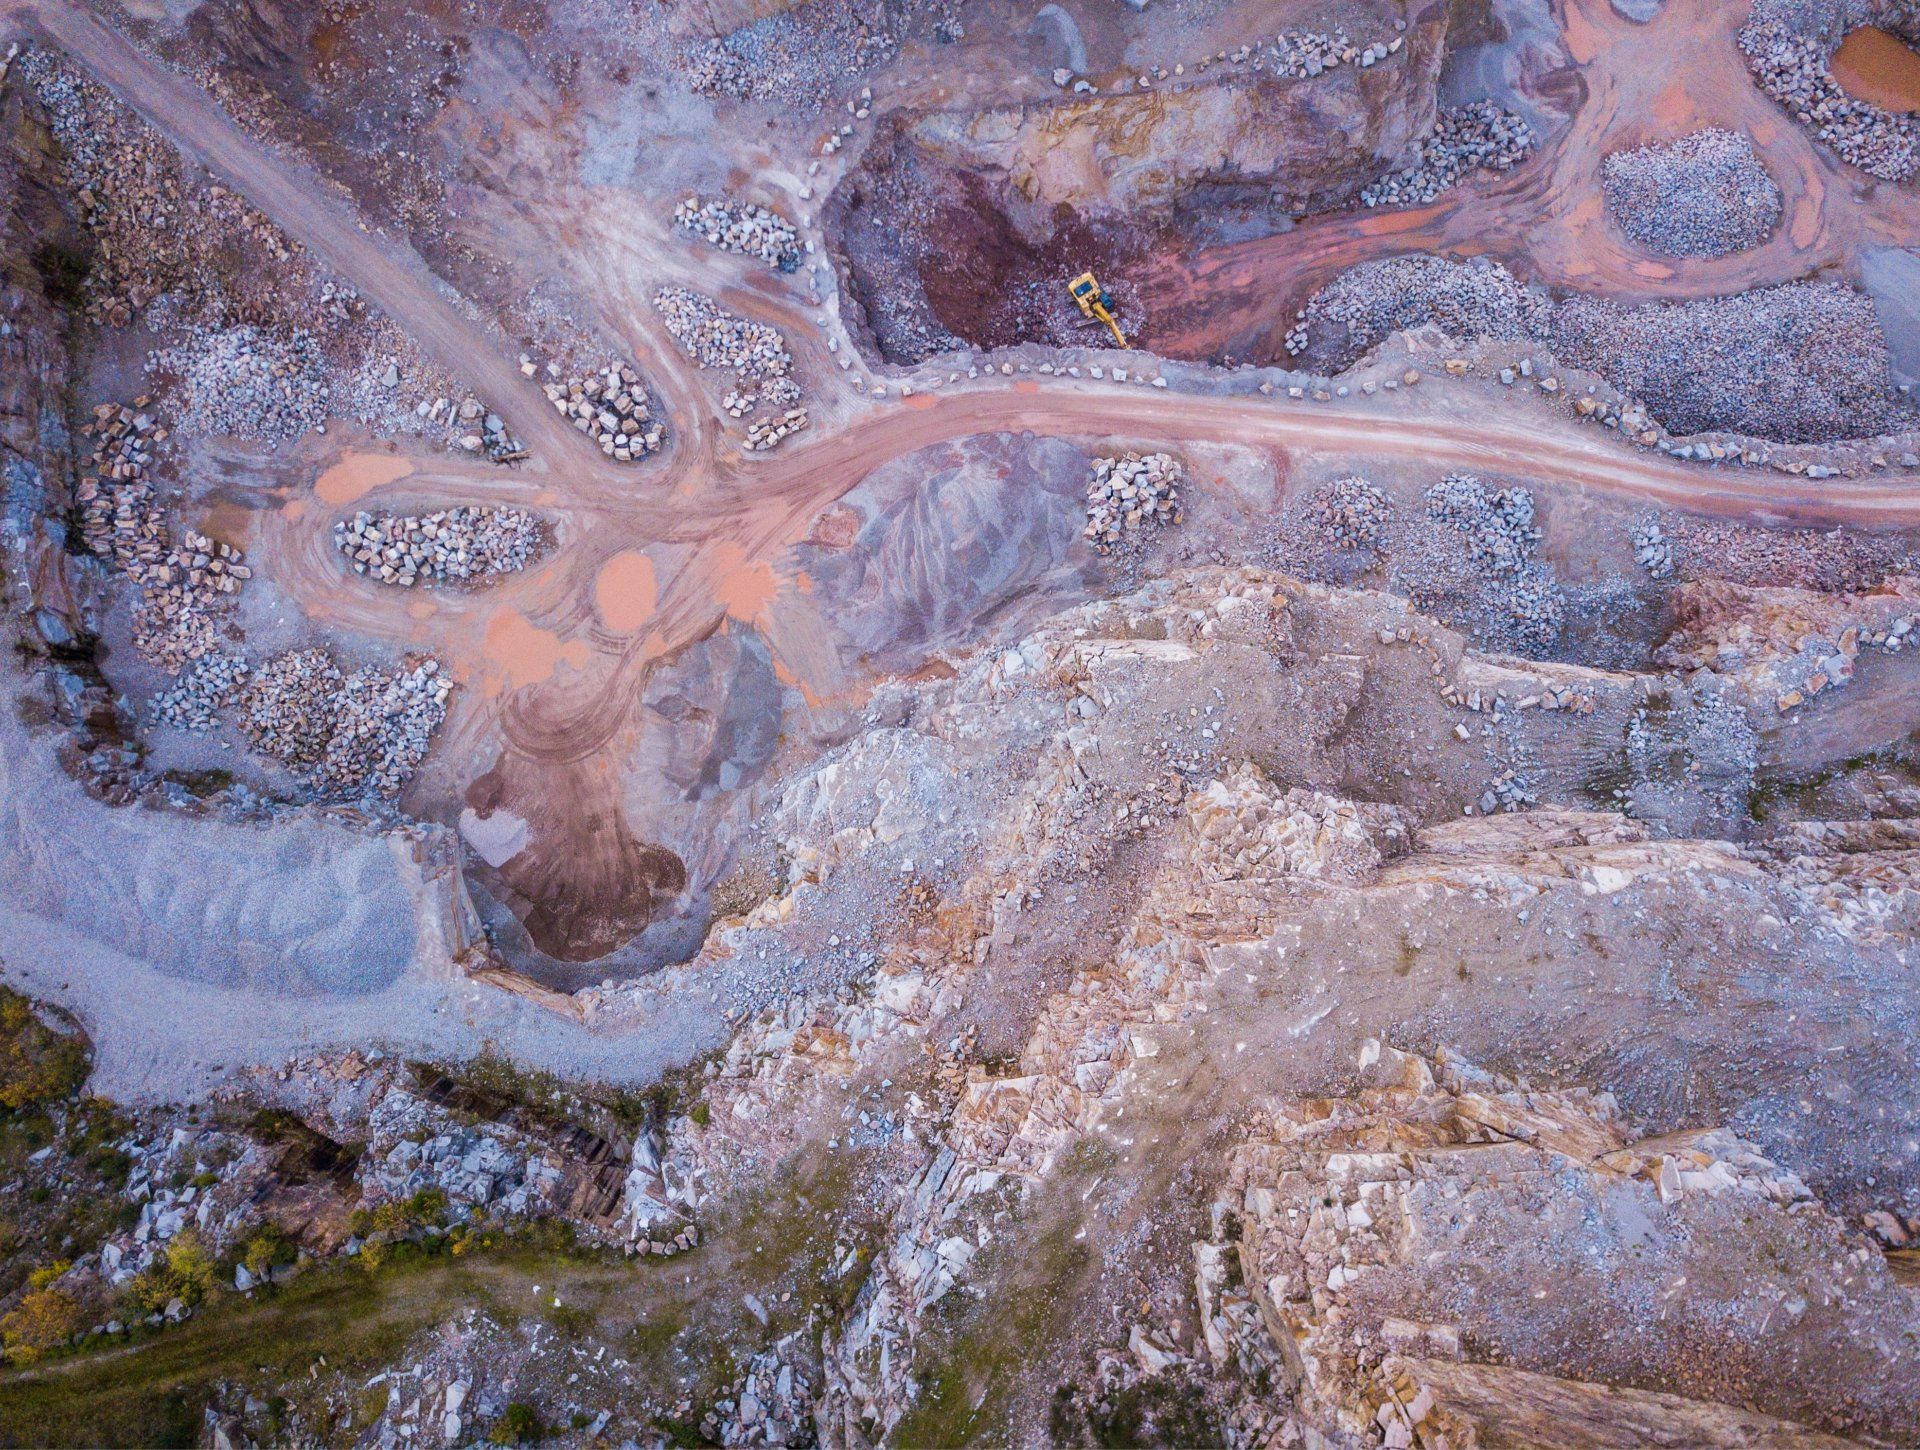 an aerial view of a rocky area with a yellow excavator in the middle